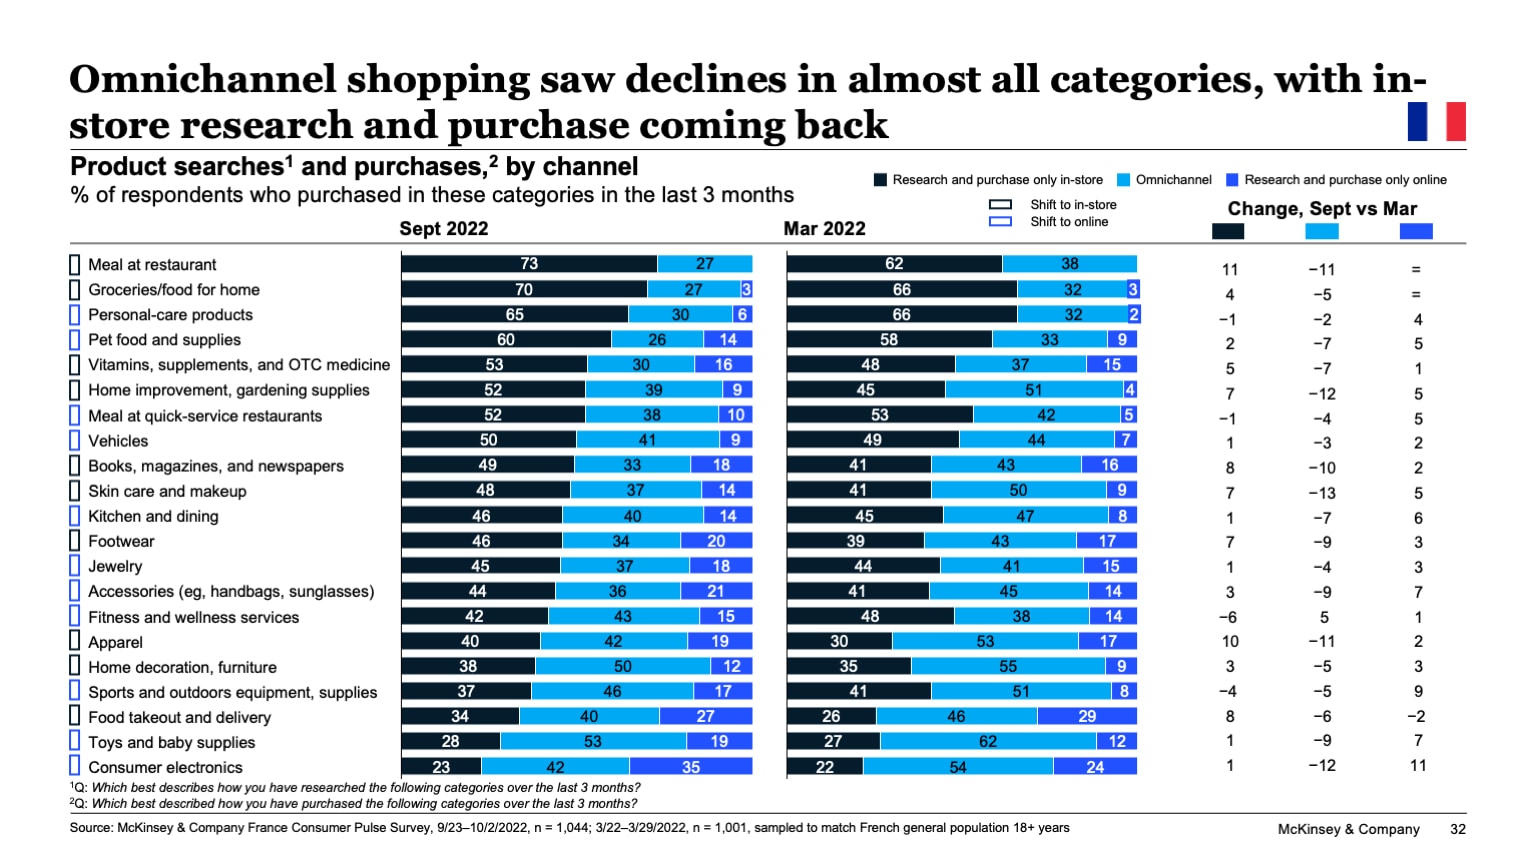 Omnichannel shopping saw declines in almost all categories, with in-store research and purchase coming back